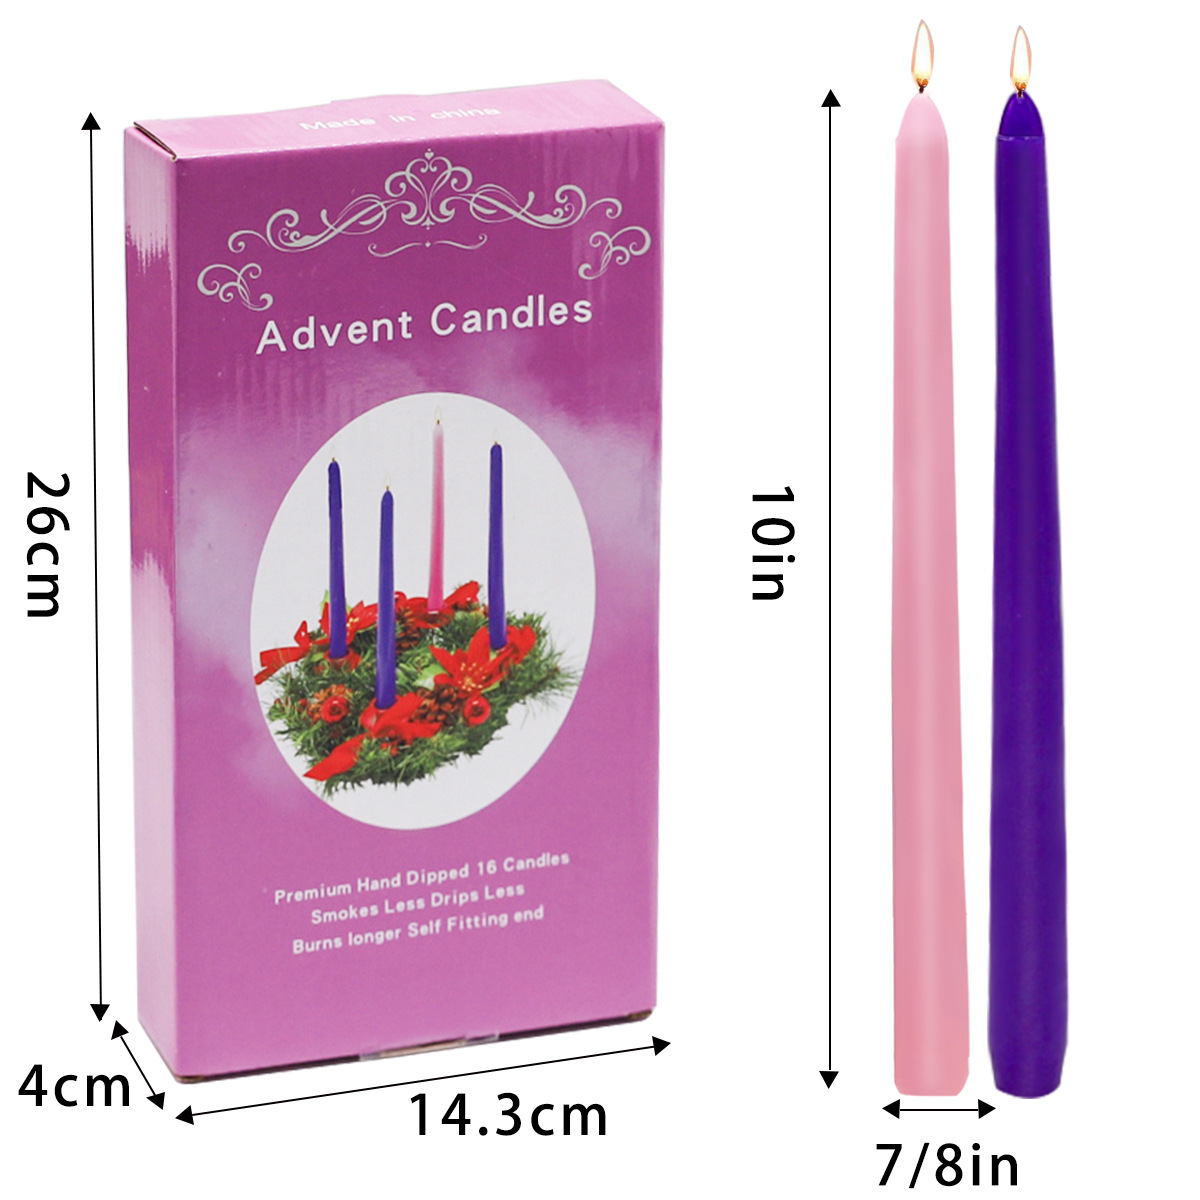 Unscented Christmas Advent Dome Top Pillar Candles